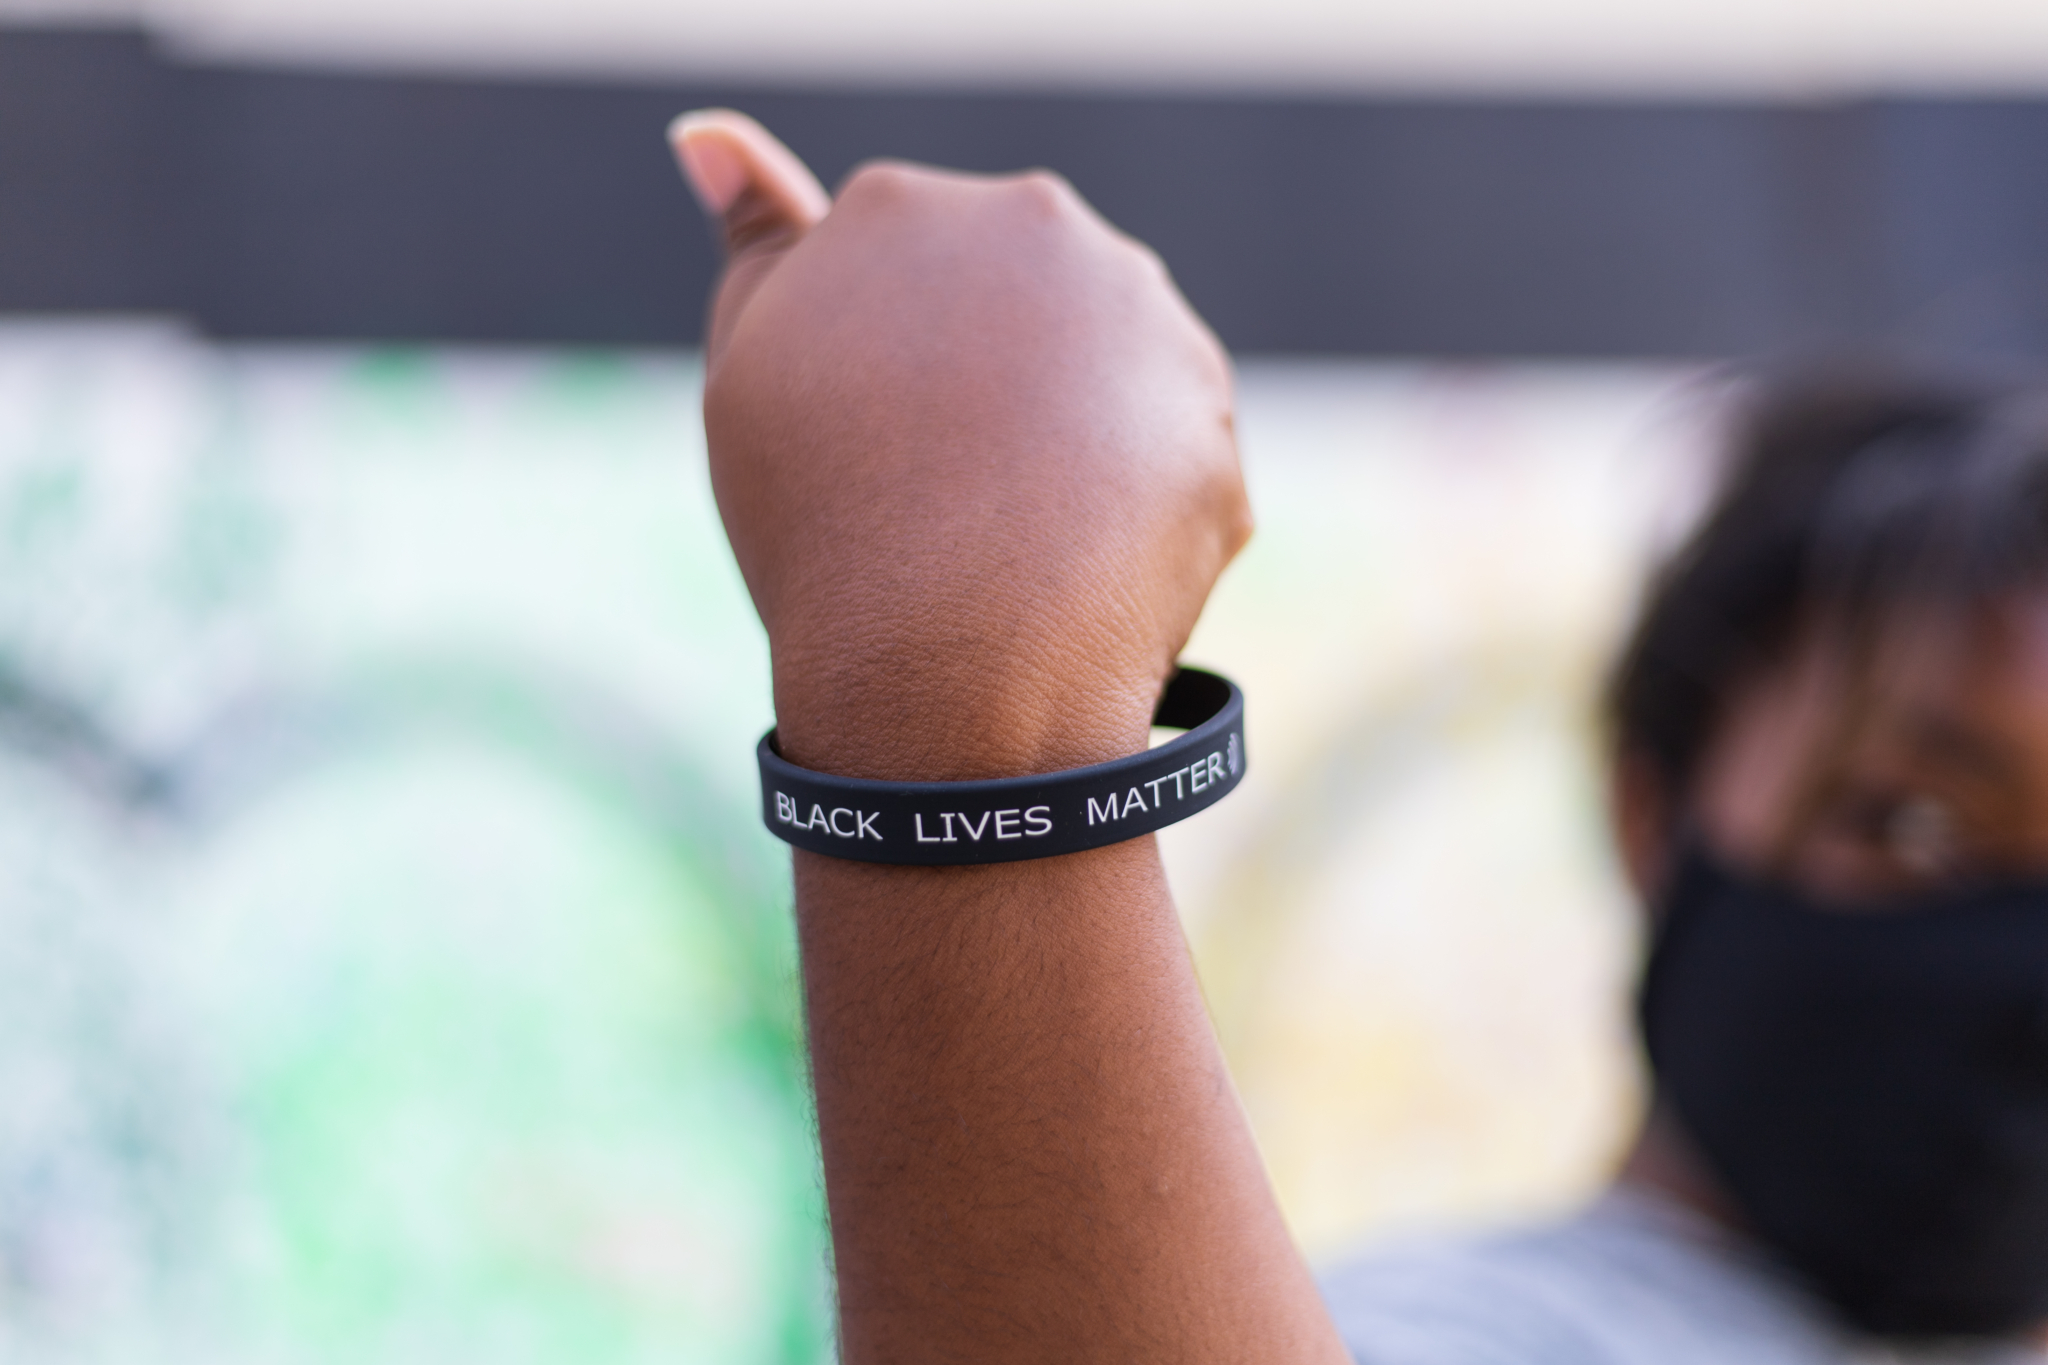 Linq 5678 Local tech startup launches $5 smart bracelet to share Black Lives Matter resources